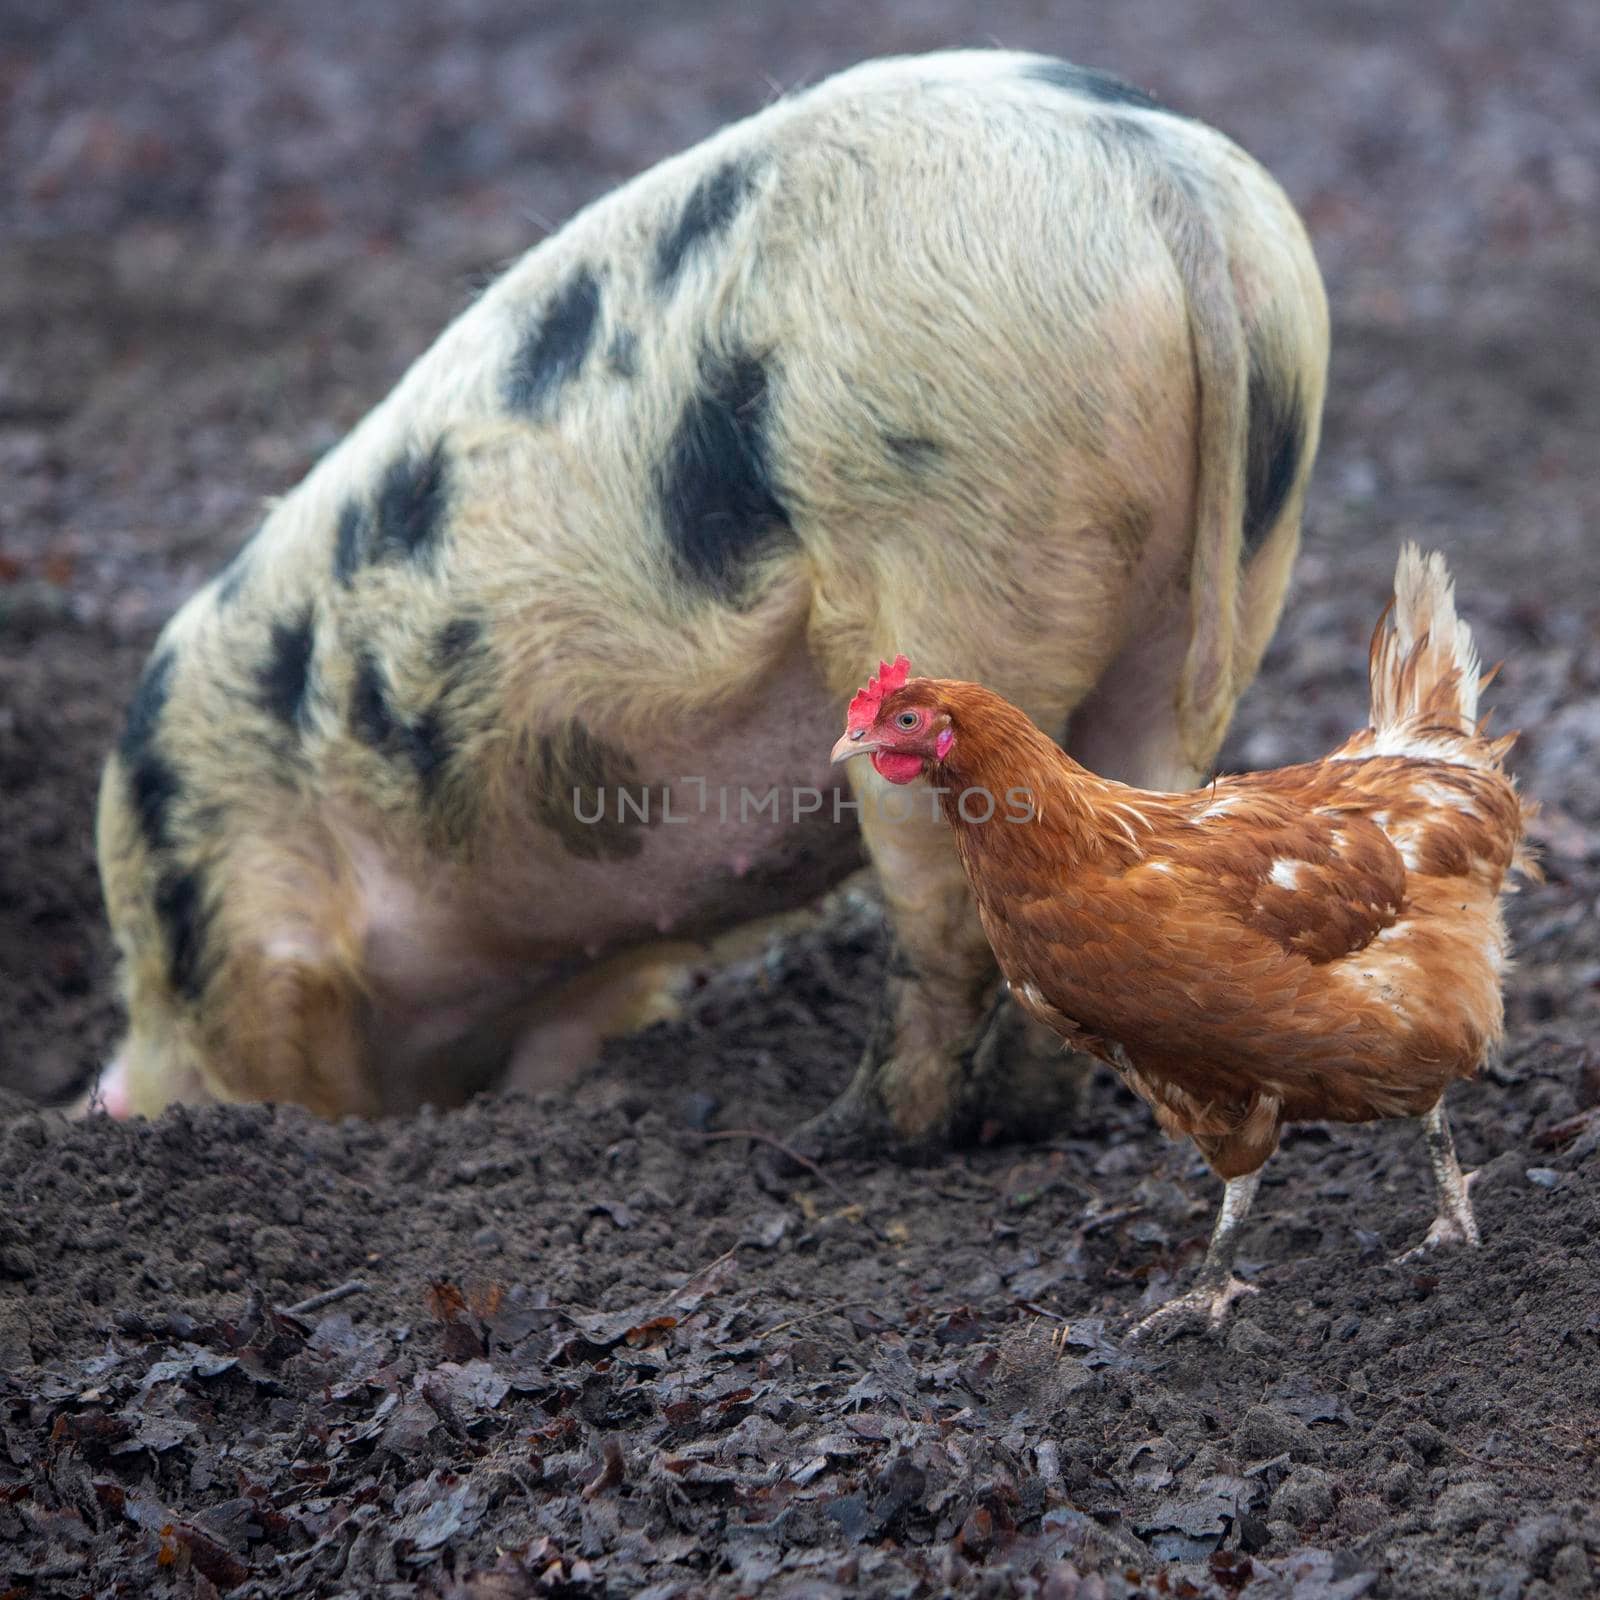 pig roots in mud and chickens roam freely on organic farm in the netherlands